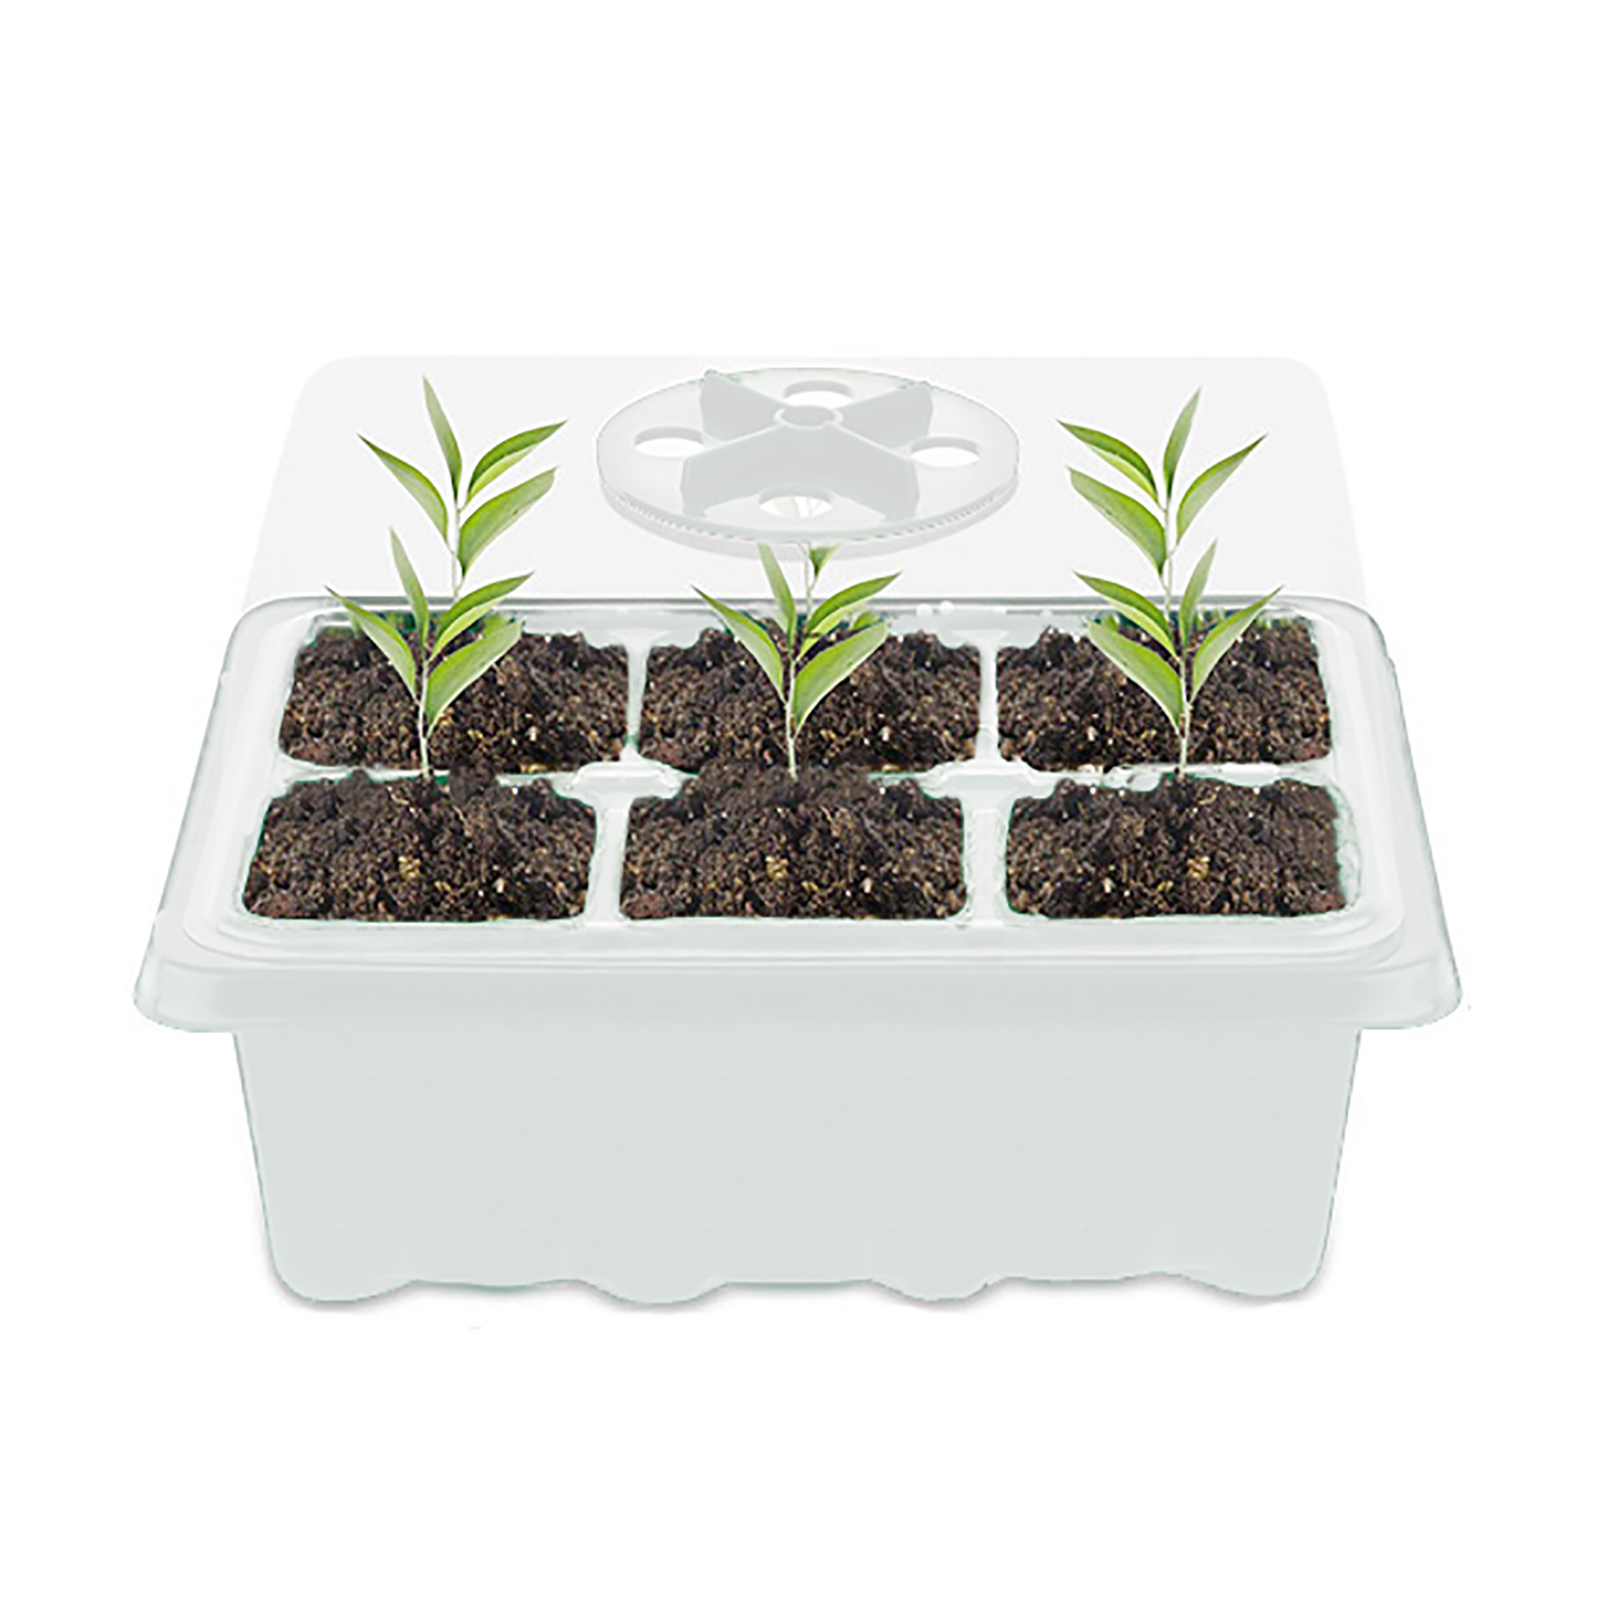 10-Pack Seed Trays Humidity Adjustable Seedling Starter Tray 12 Cells per Tray 